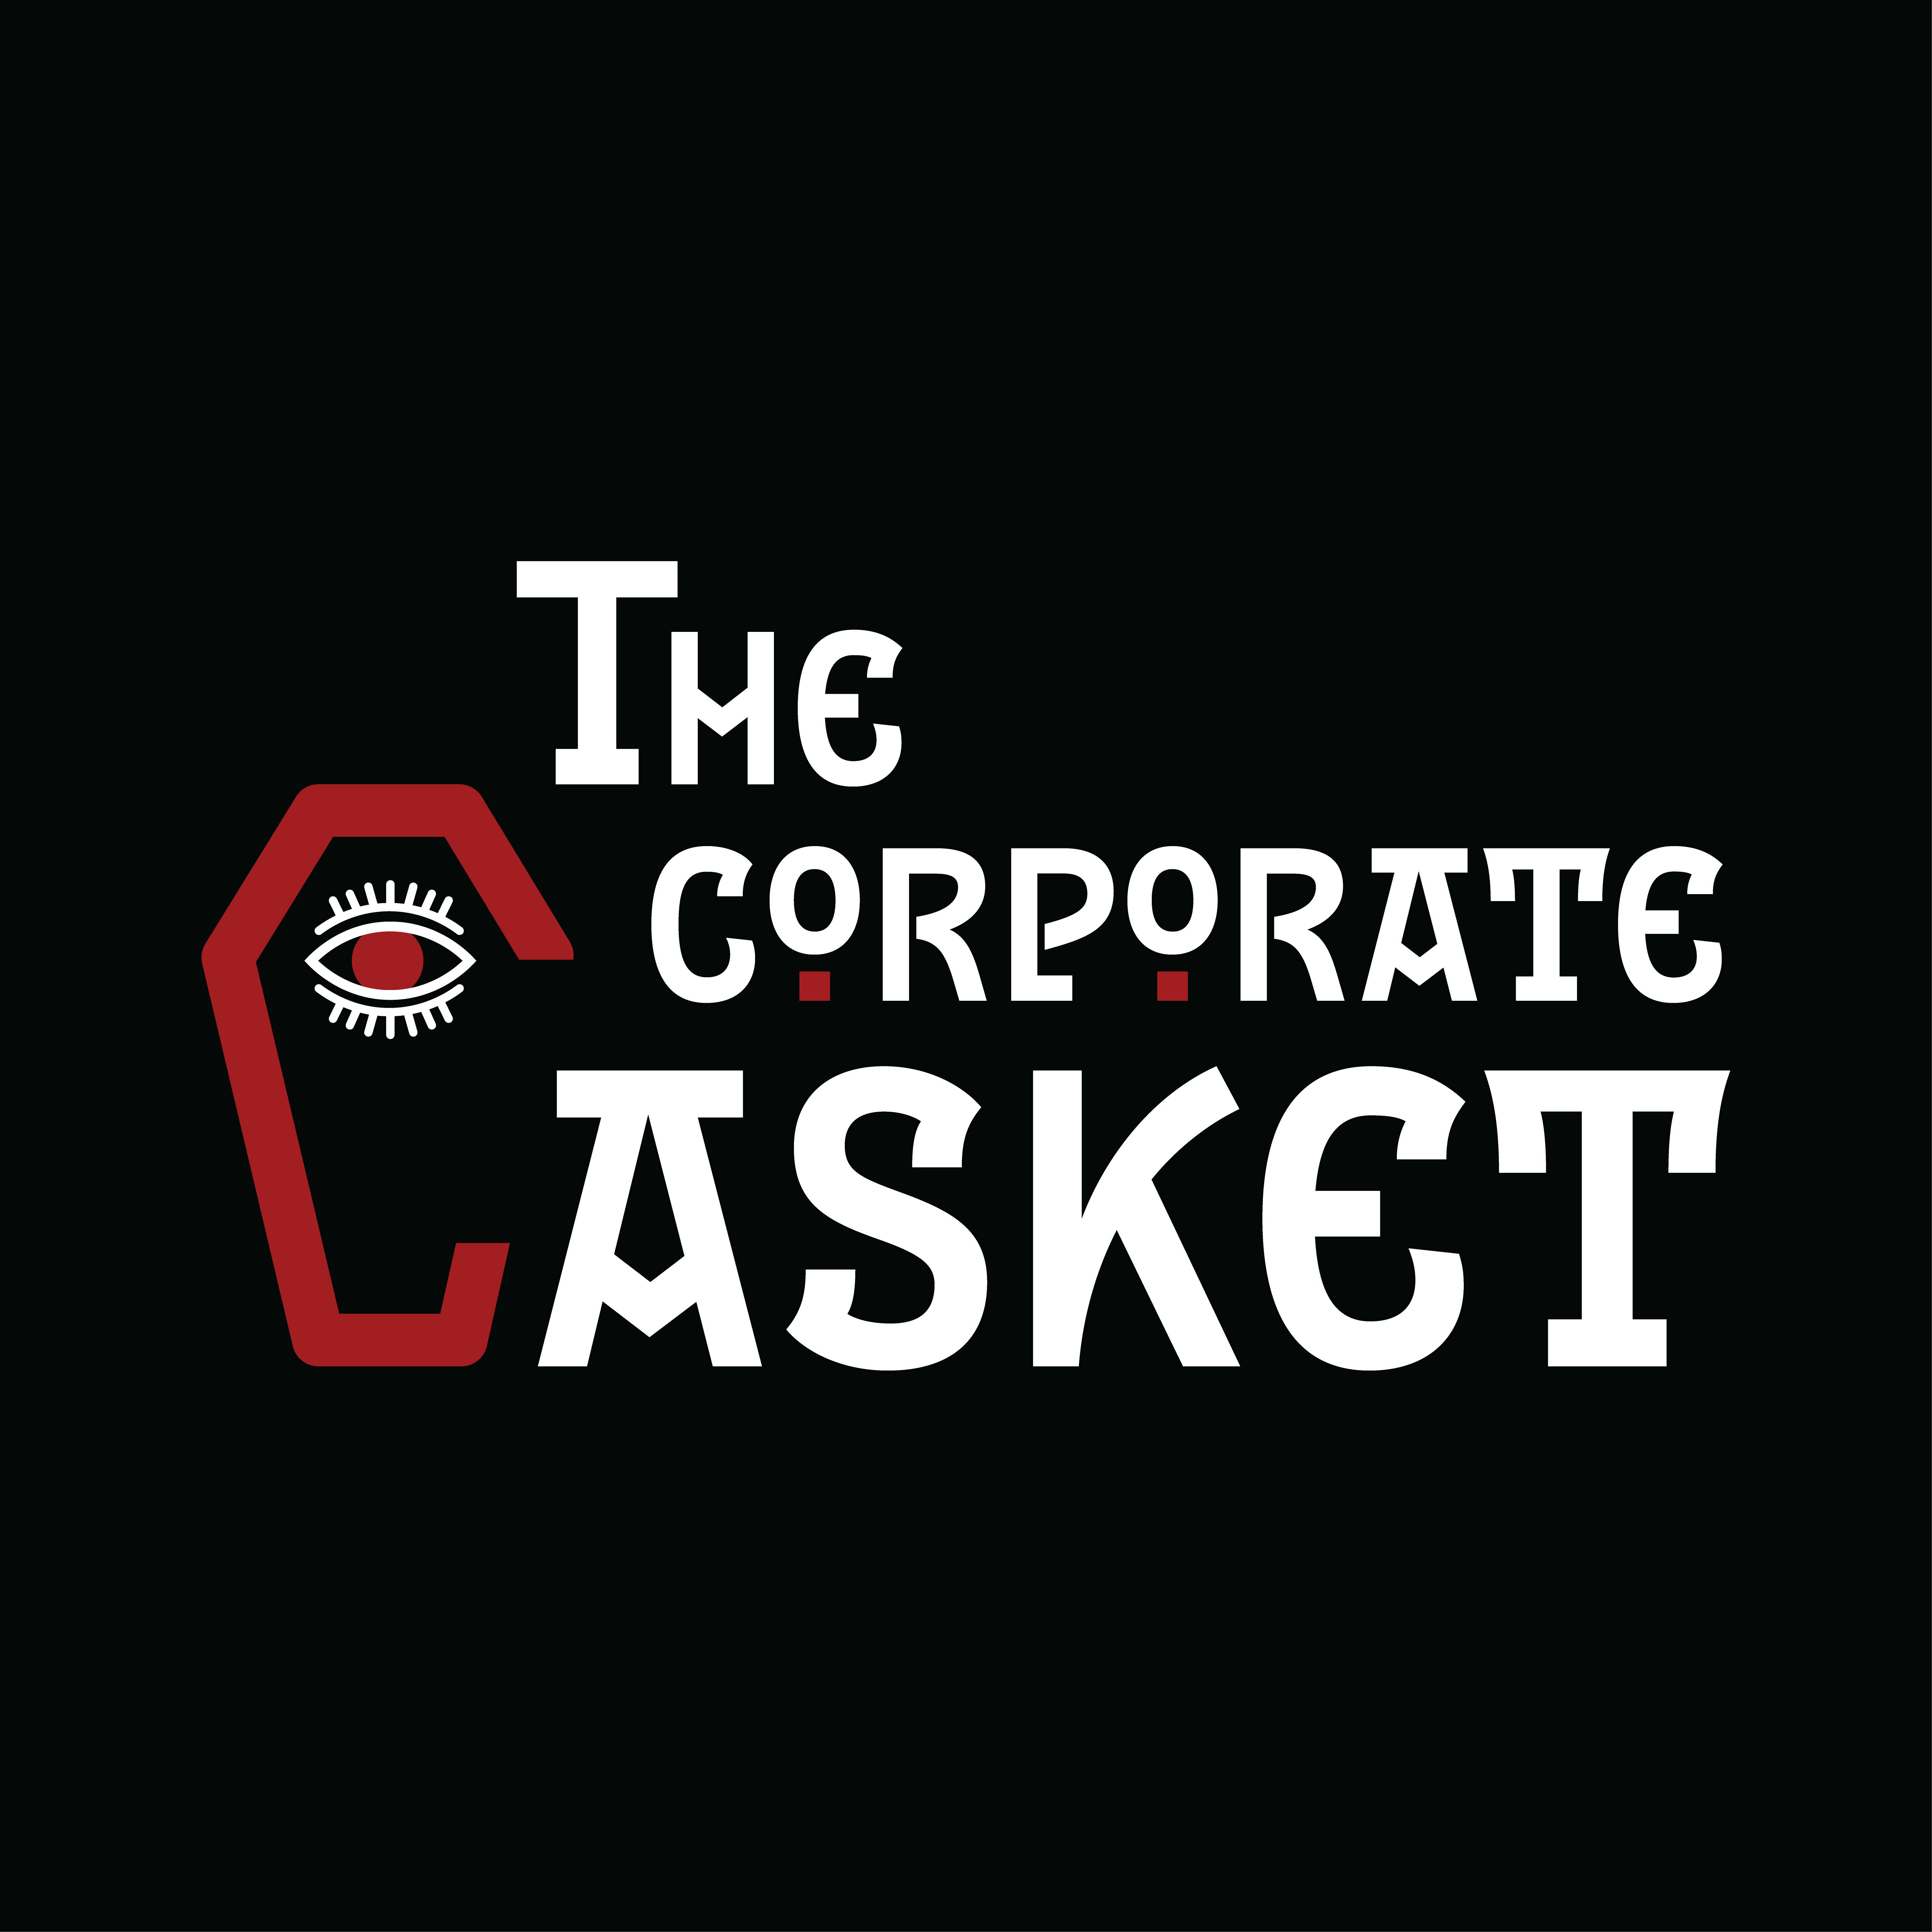 Exposing the Underbelly of the Ballet Industry | Corporate Casket